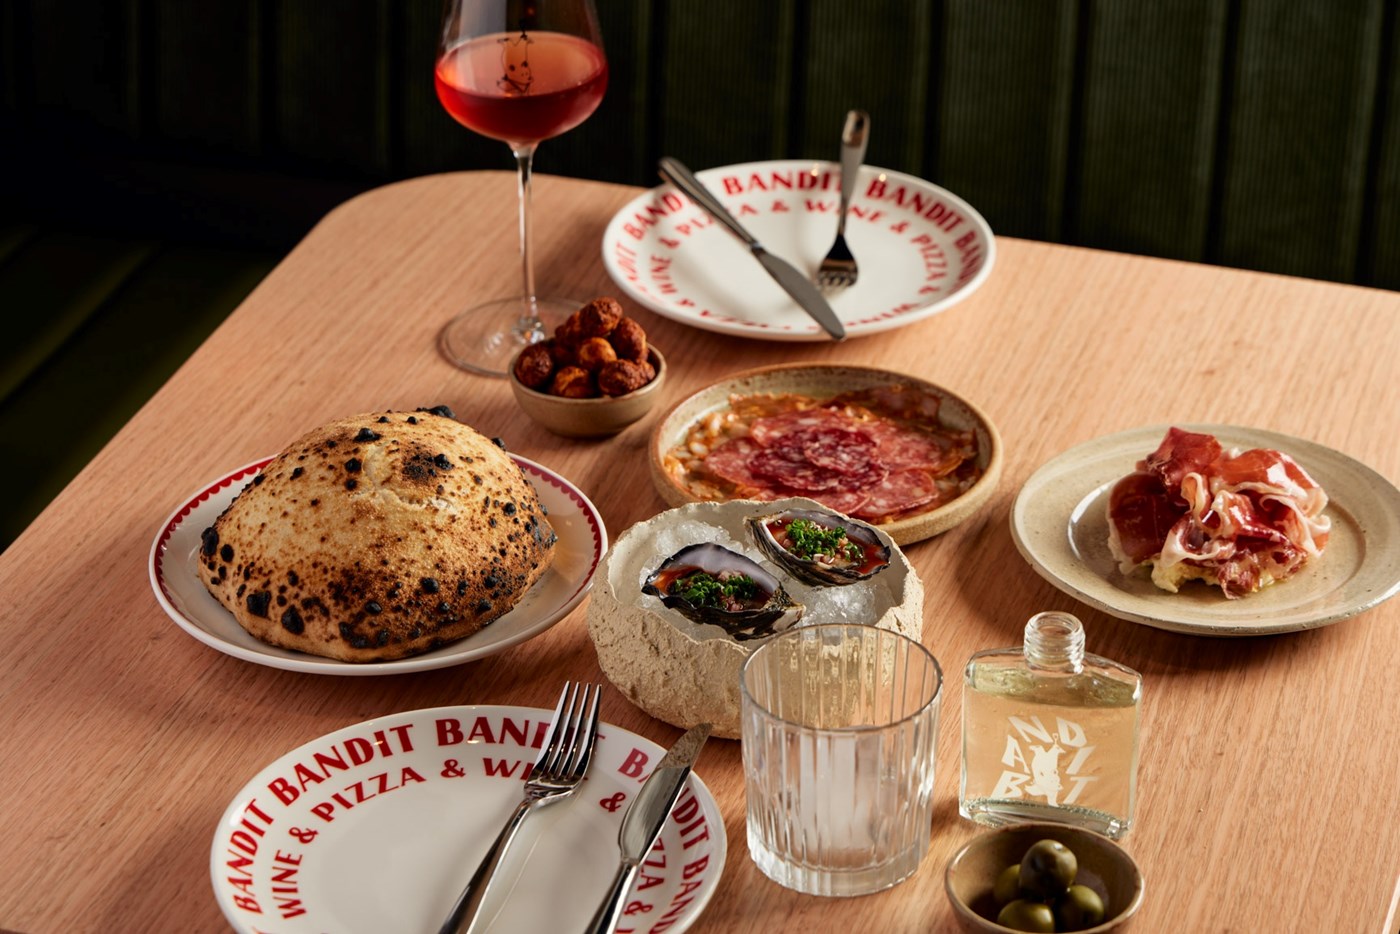 Calzone, oysters and salami at Bandit Pizza and Wine in Adelaide